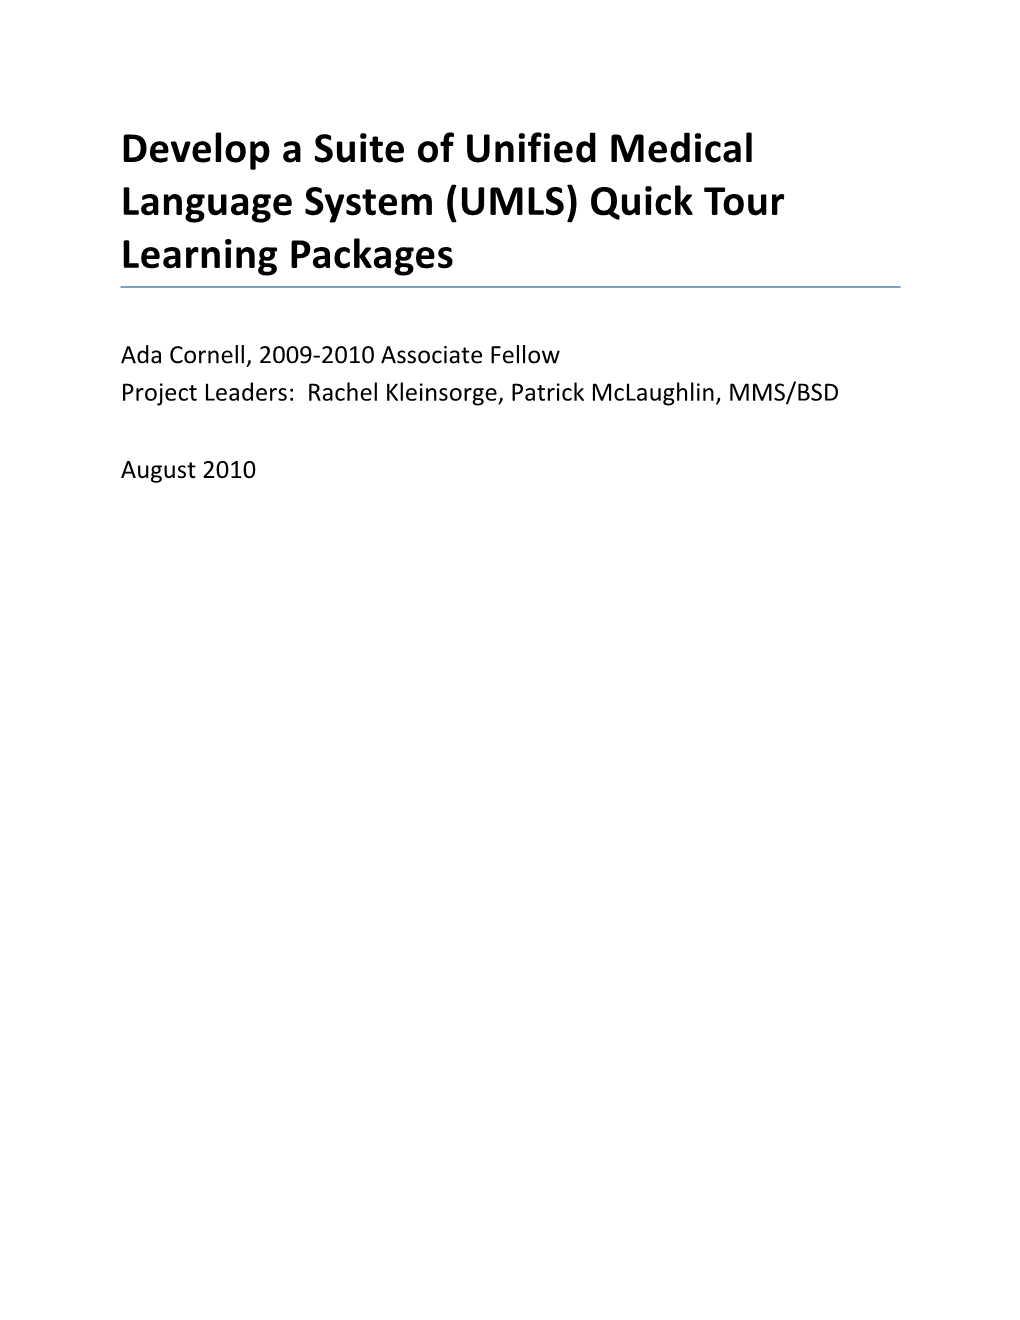 Develop a Suite of UMLS Quicktour Learning Packages